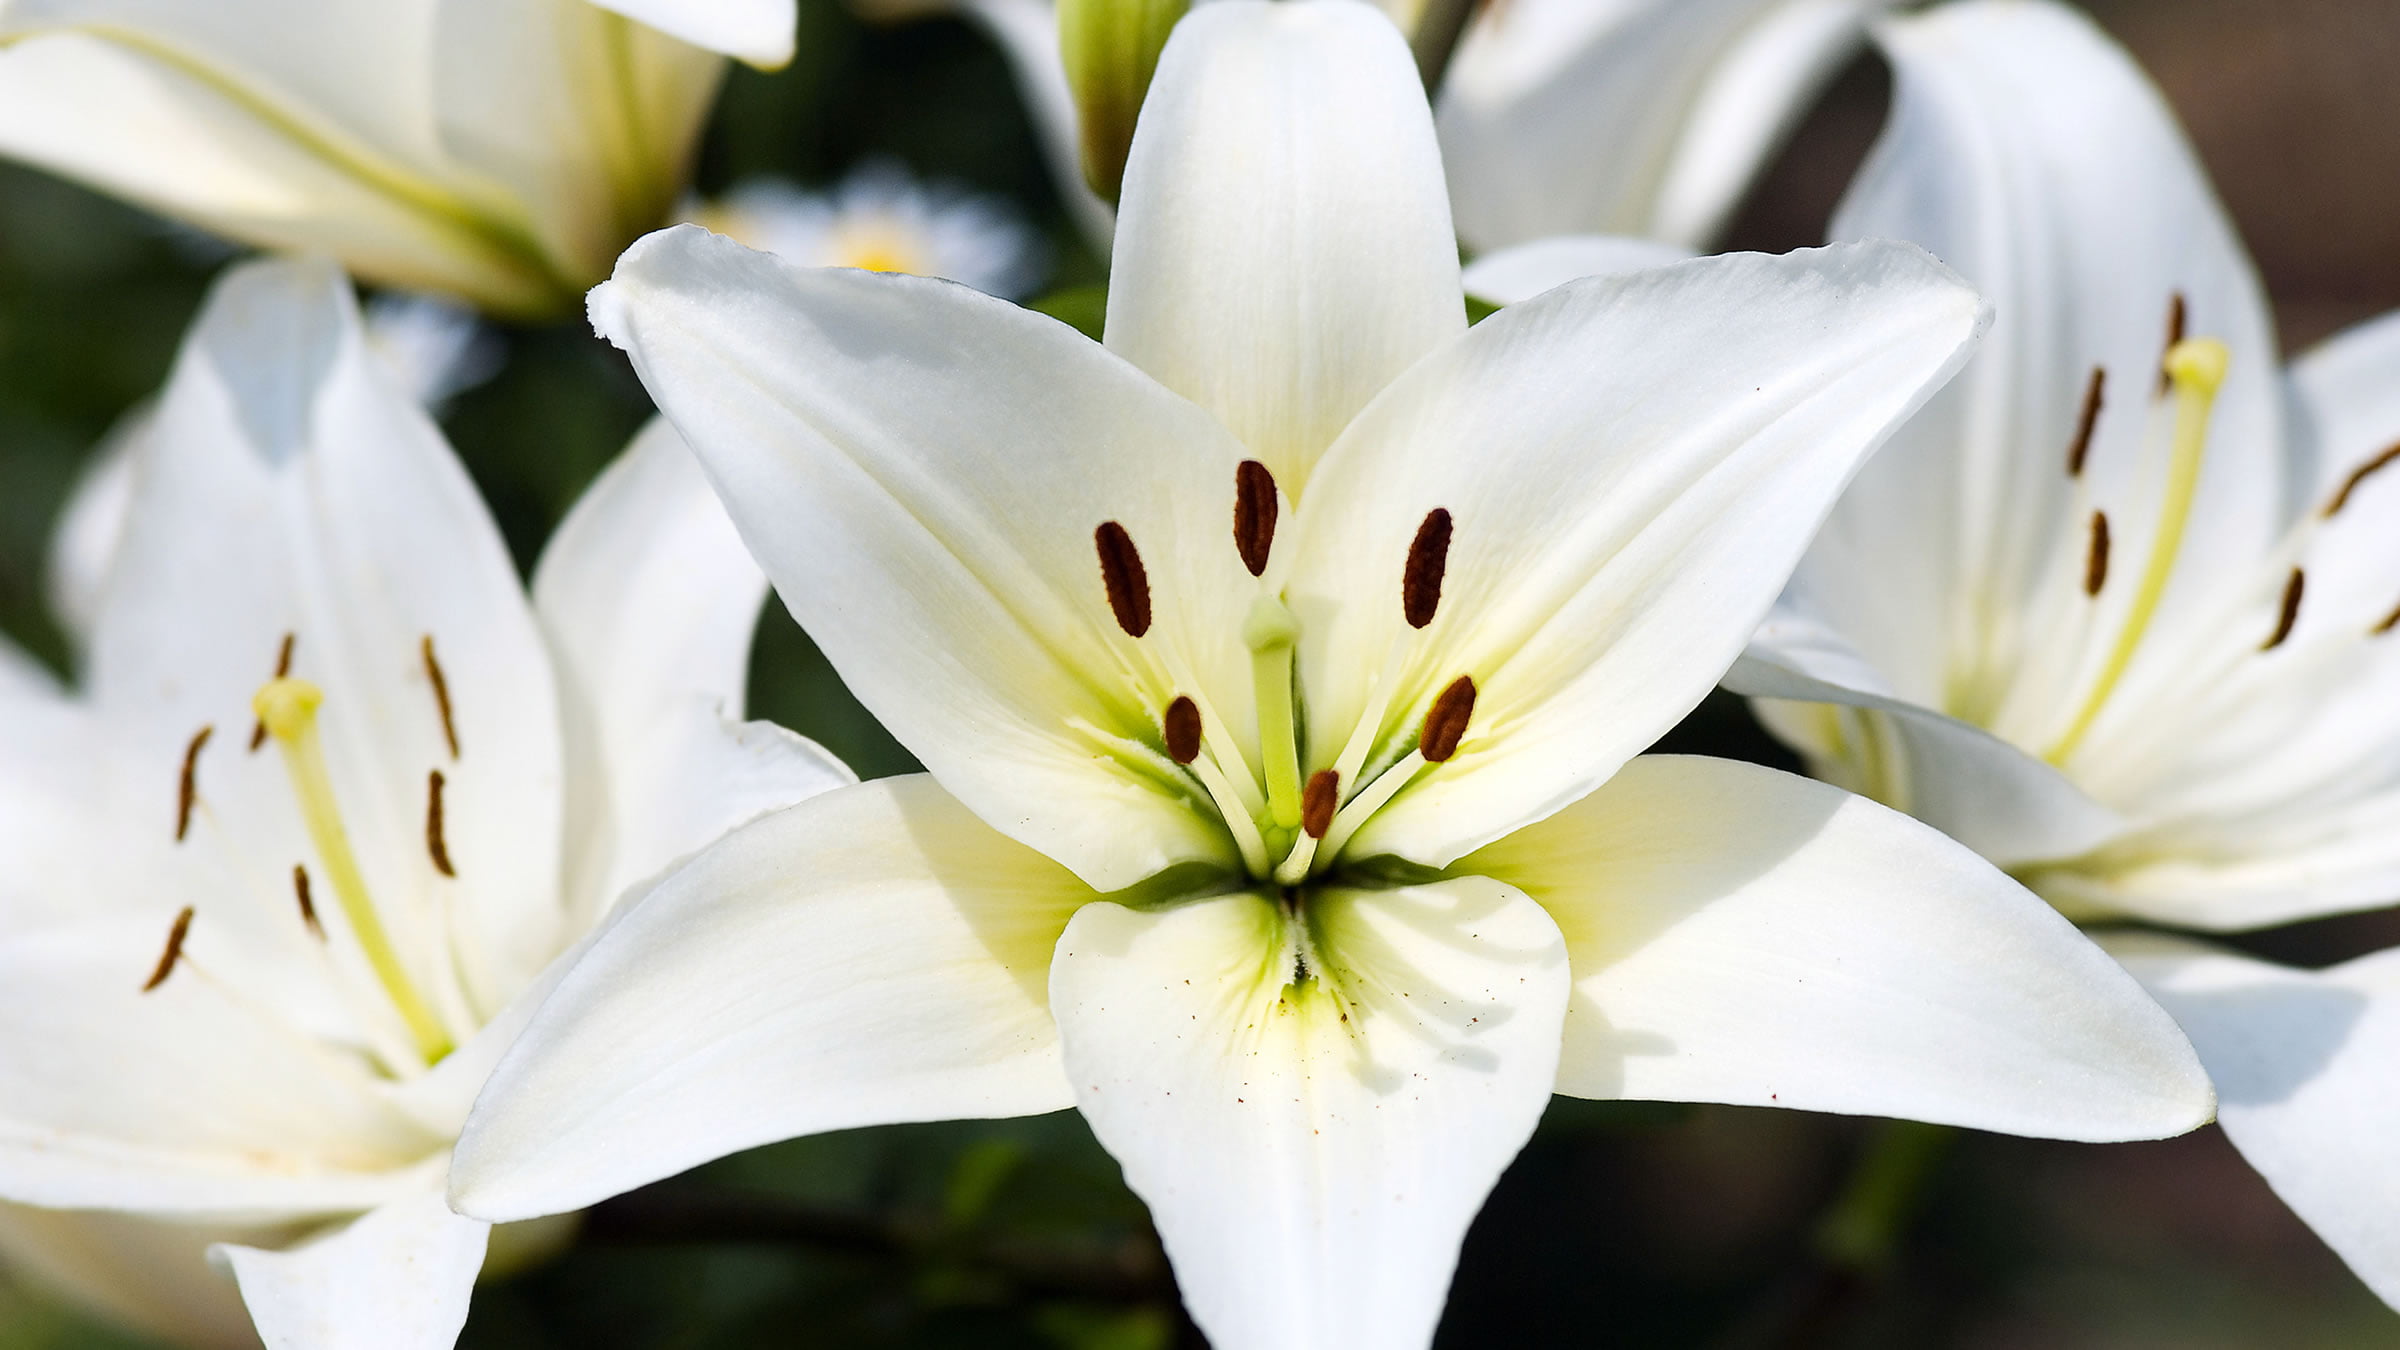 The lily: the most common flower at English funerals